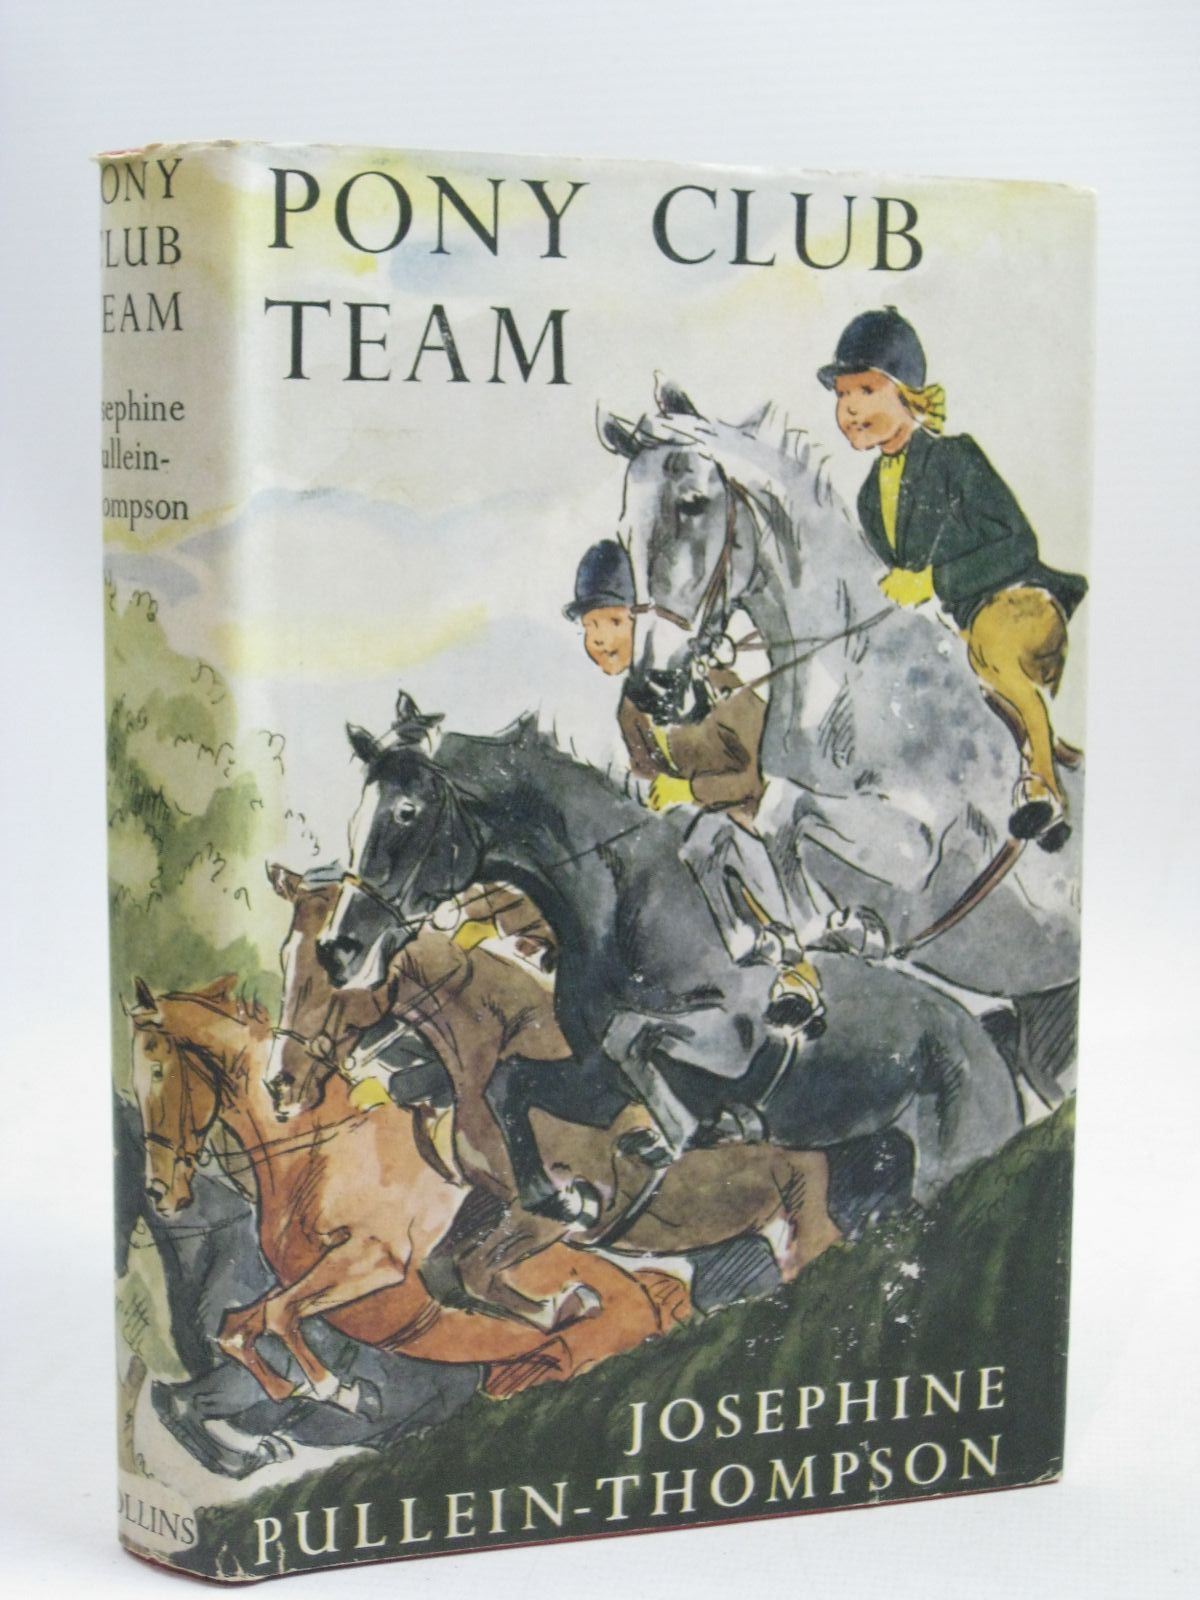 Cover of PONY CLUB TEAM by Josephine Pullein-Thompson